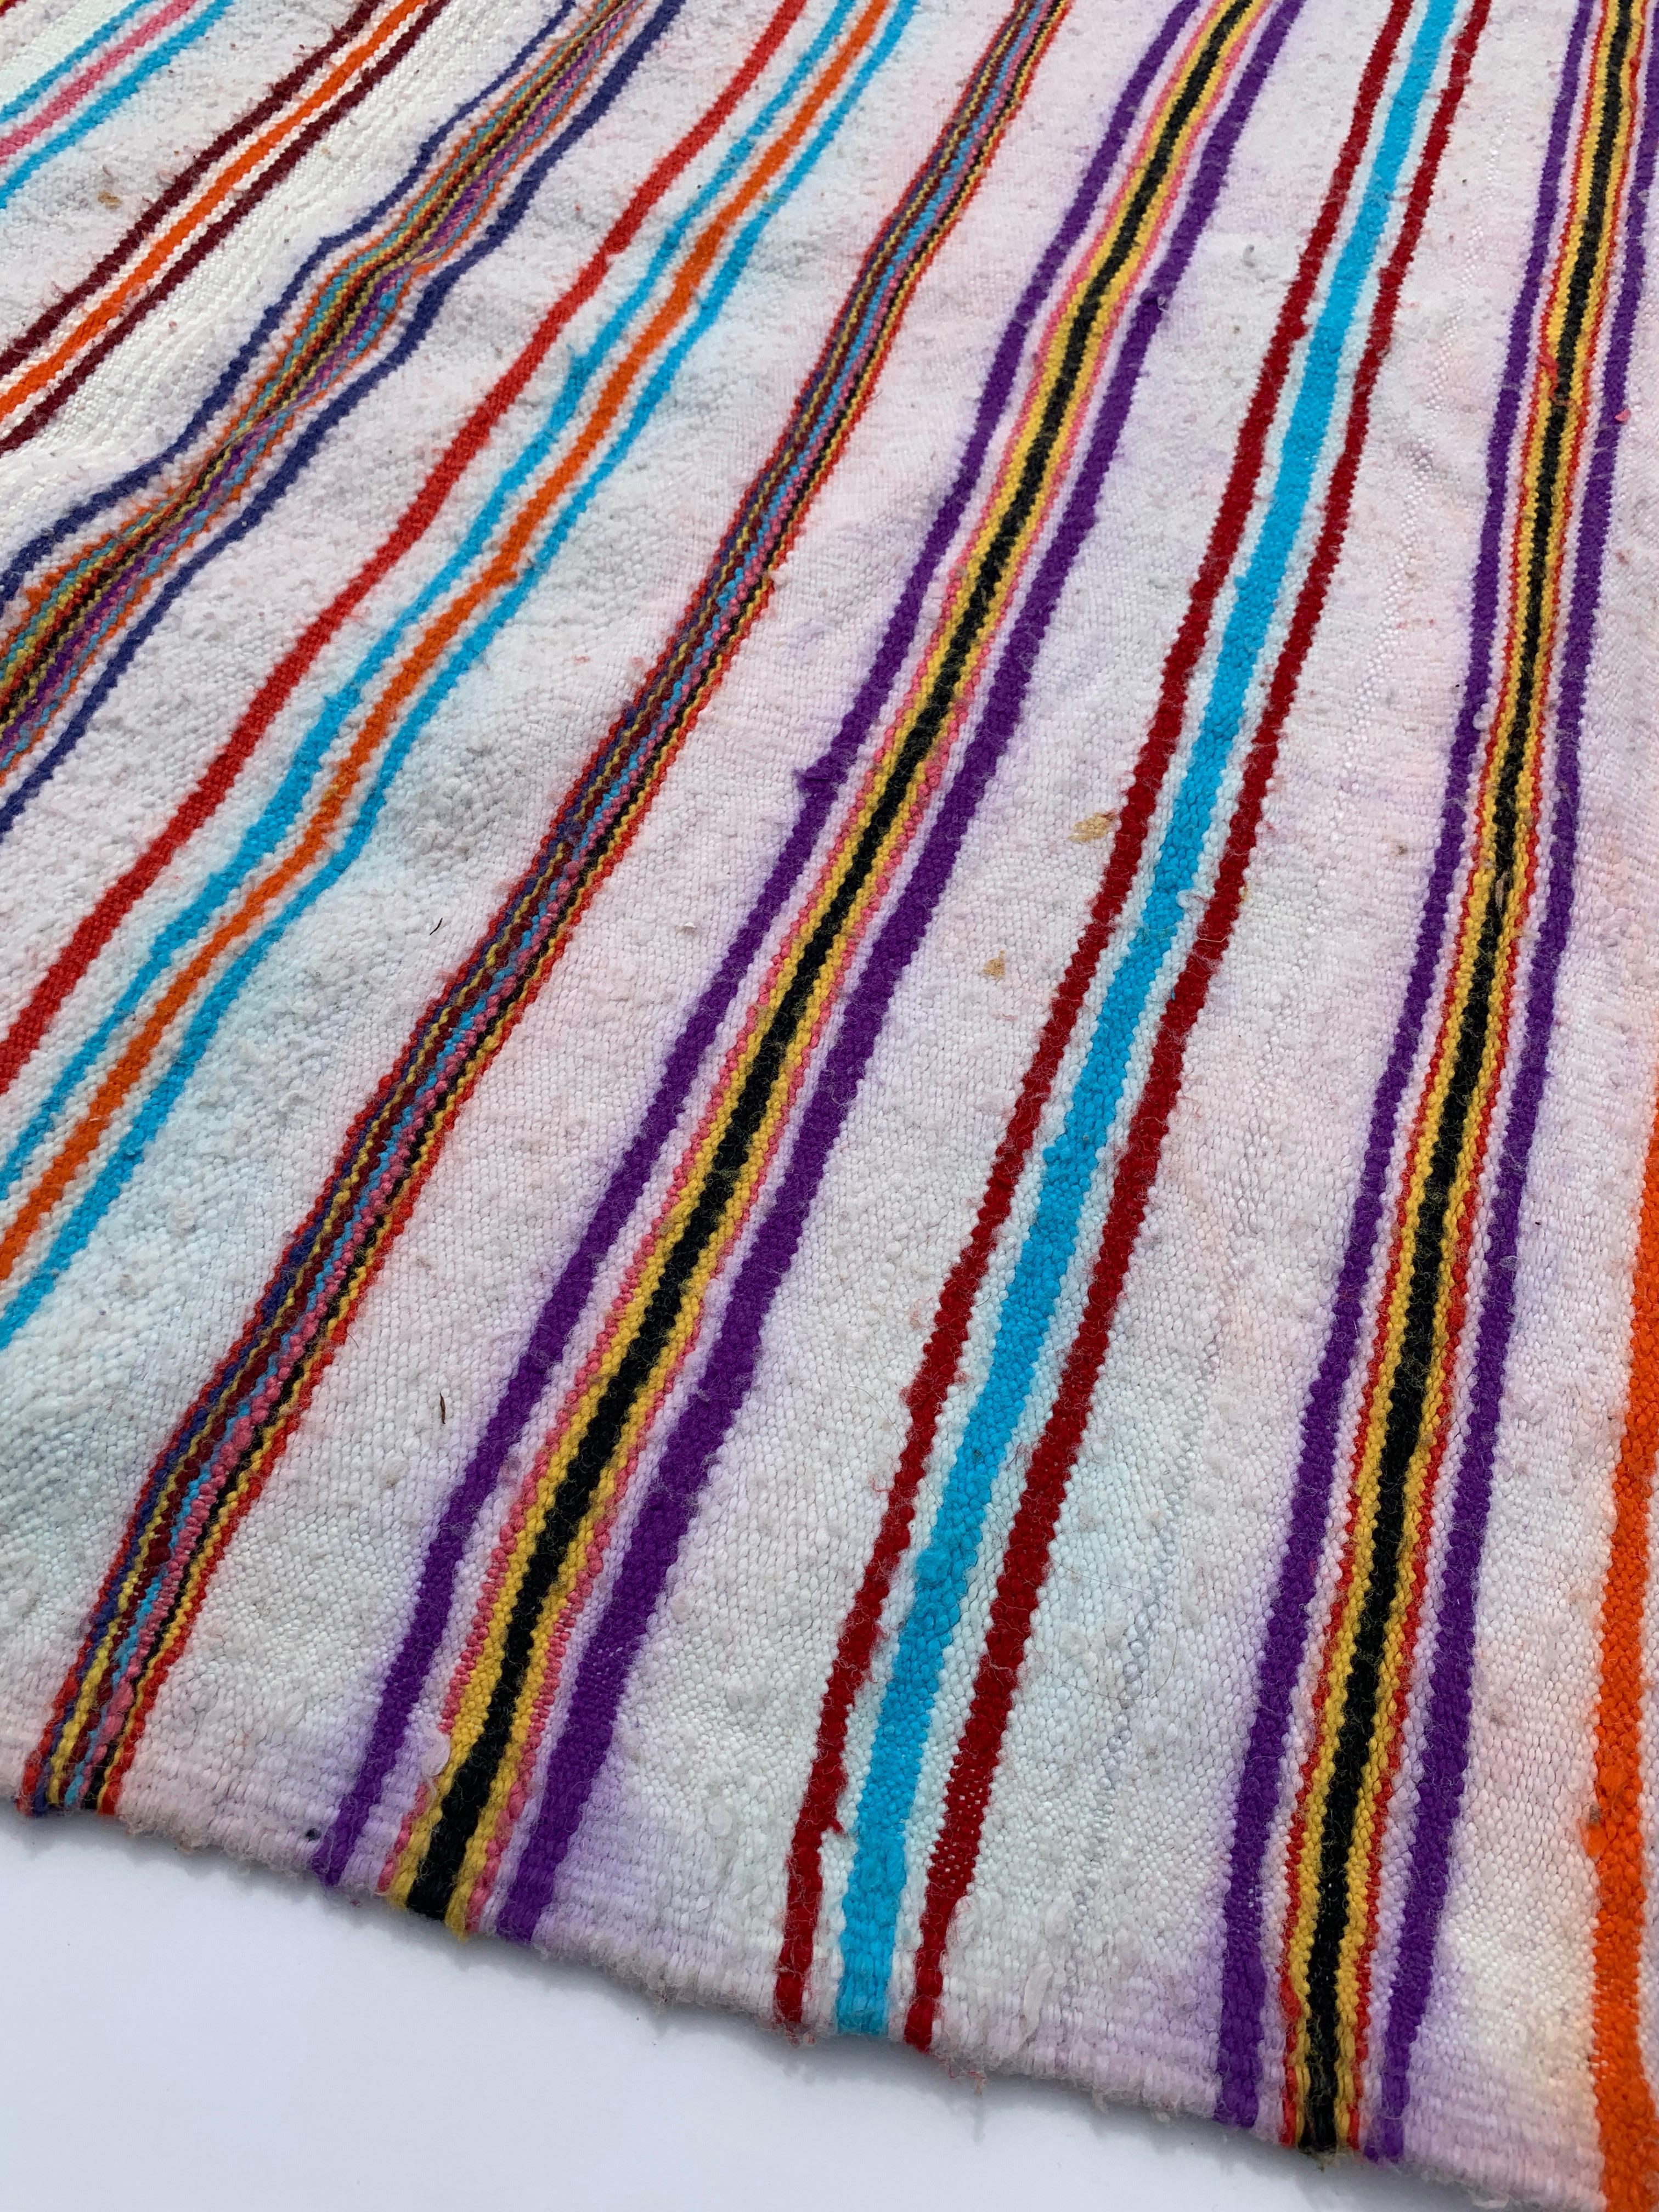 1970s Algerian Berber Striped Wool Rug Throw Handmade Vintage African 210x190cm In Good Condition For Sale In London, GB